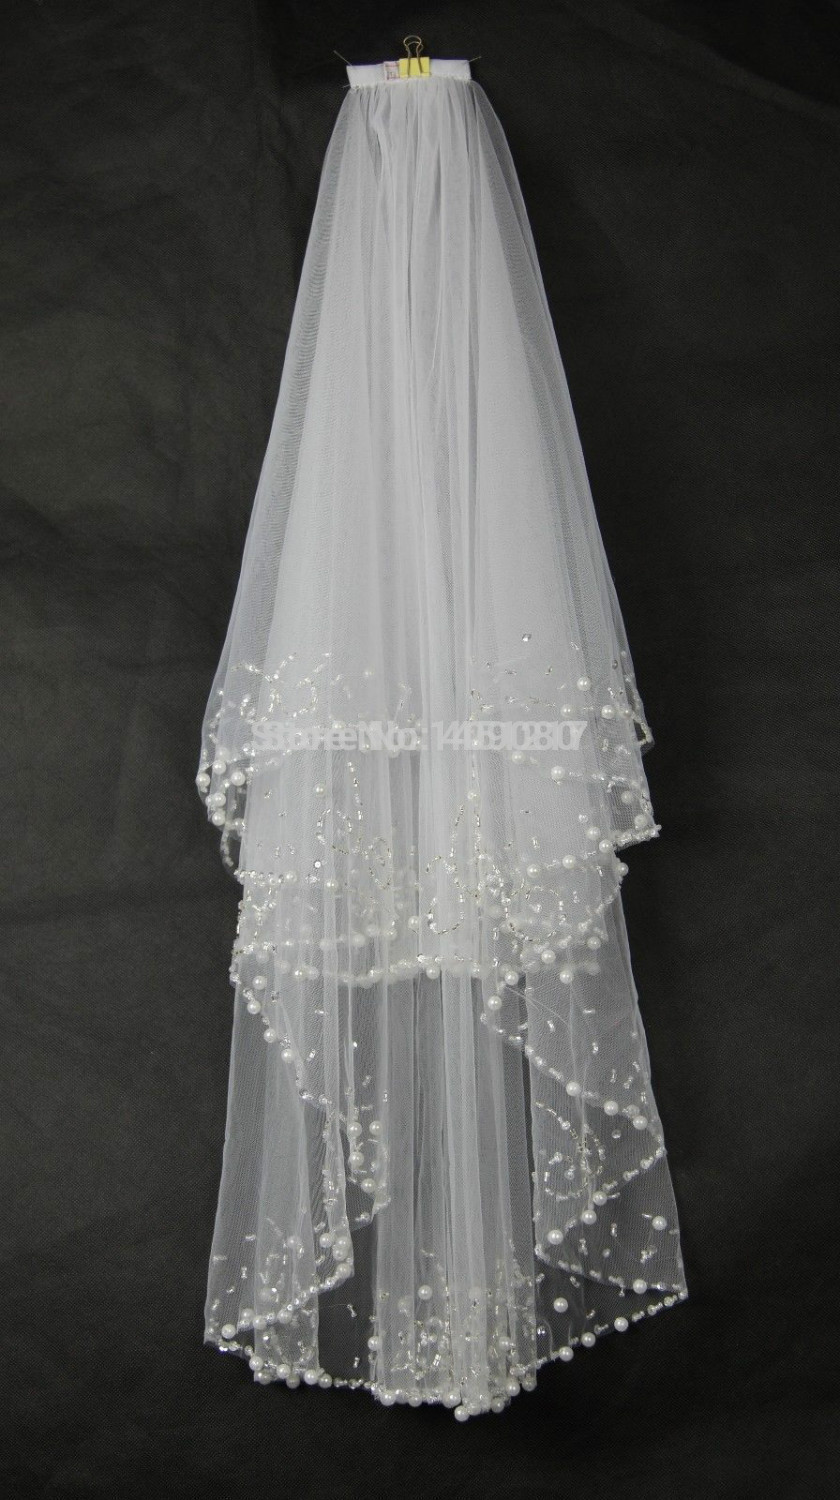 Ivory Wedding Veils With Pearls
 2T White Ivory Beads Pearls Wedding Veil Bridal Veil With